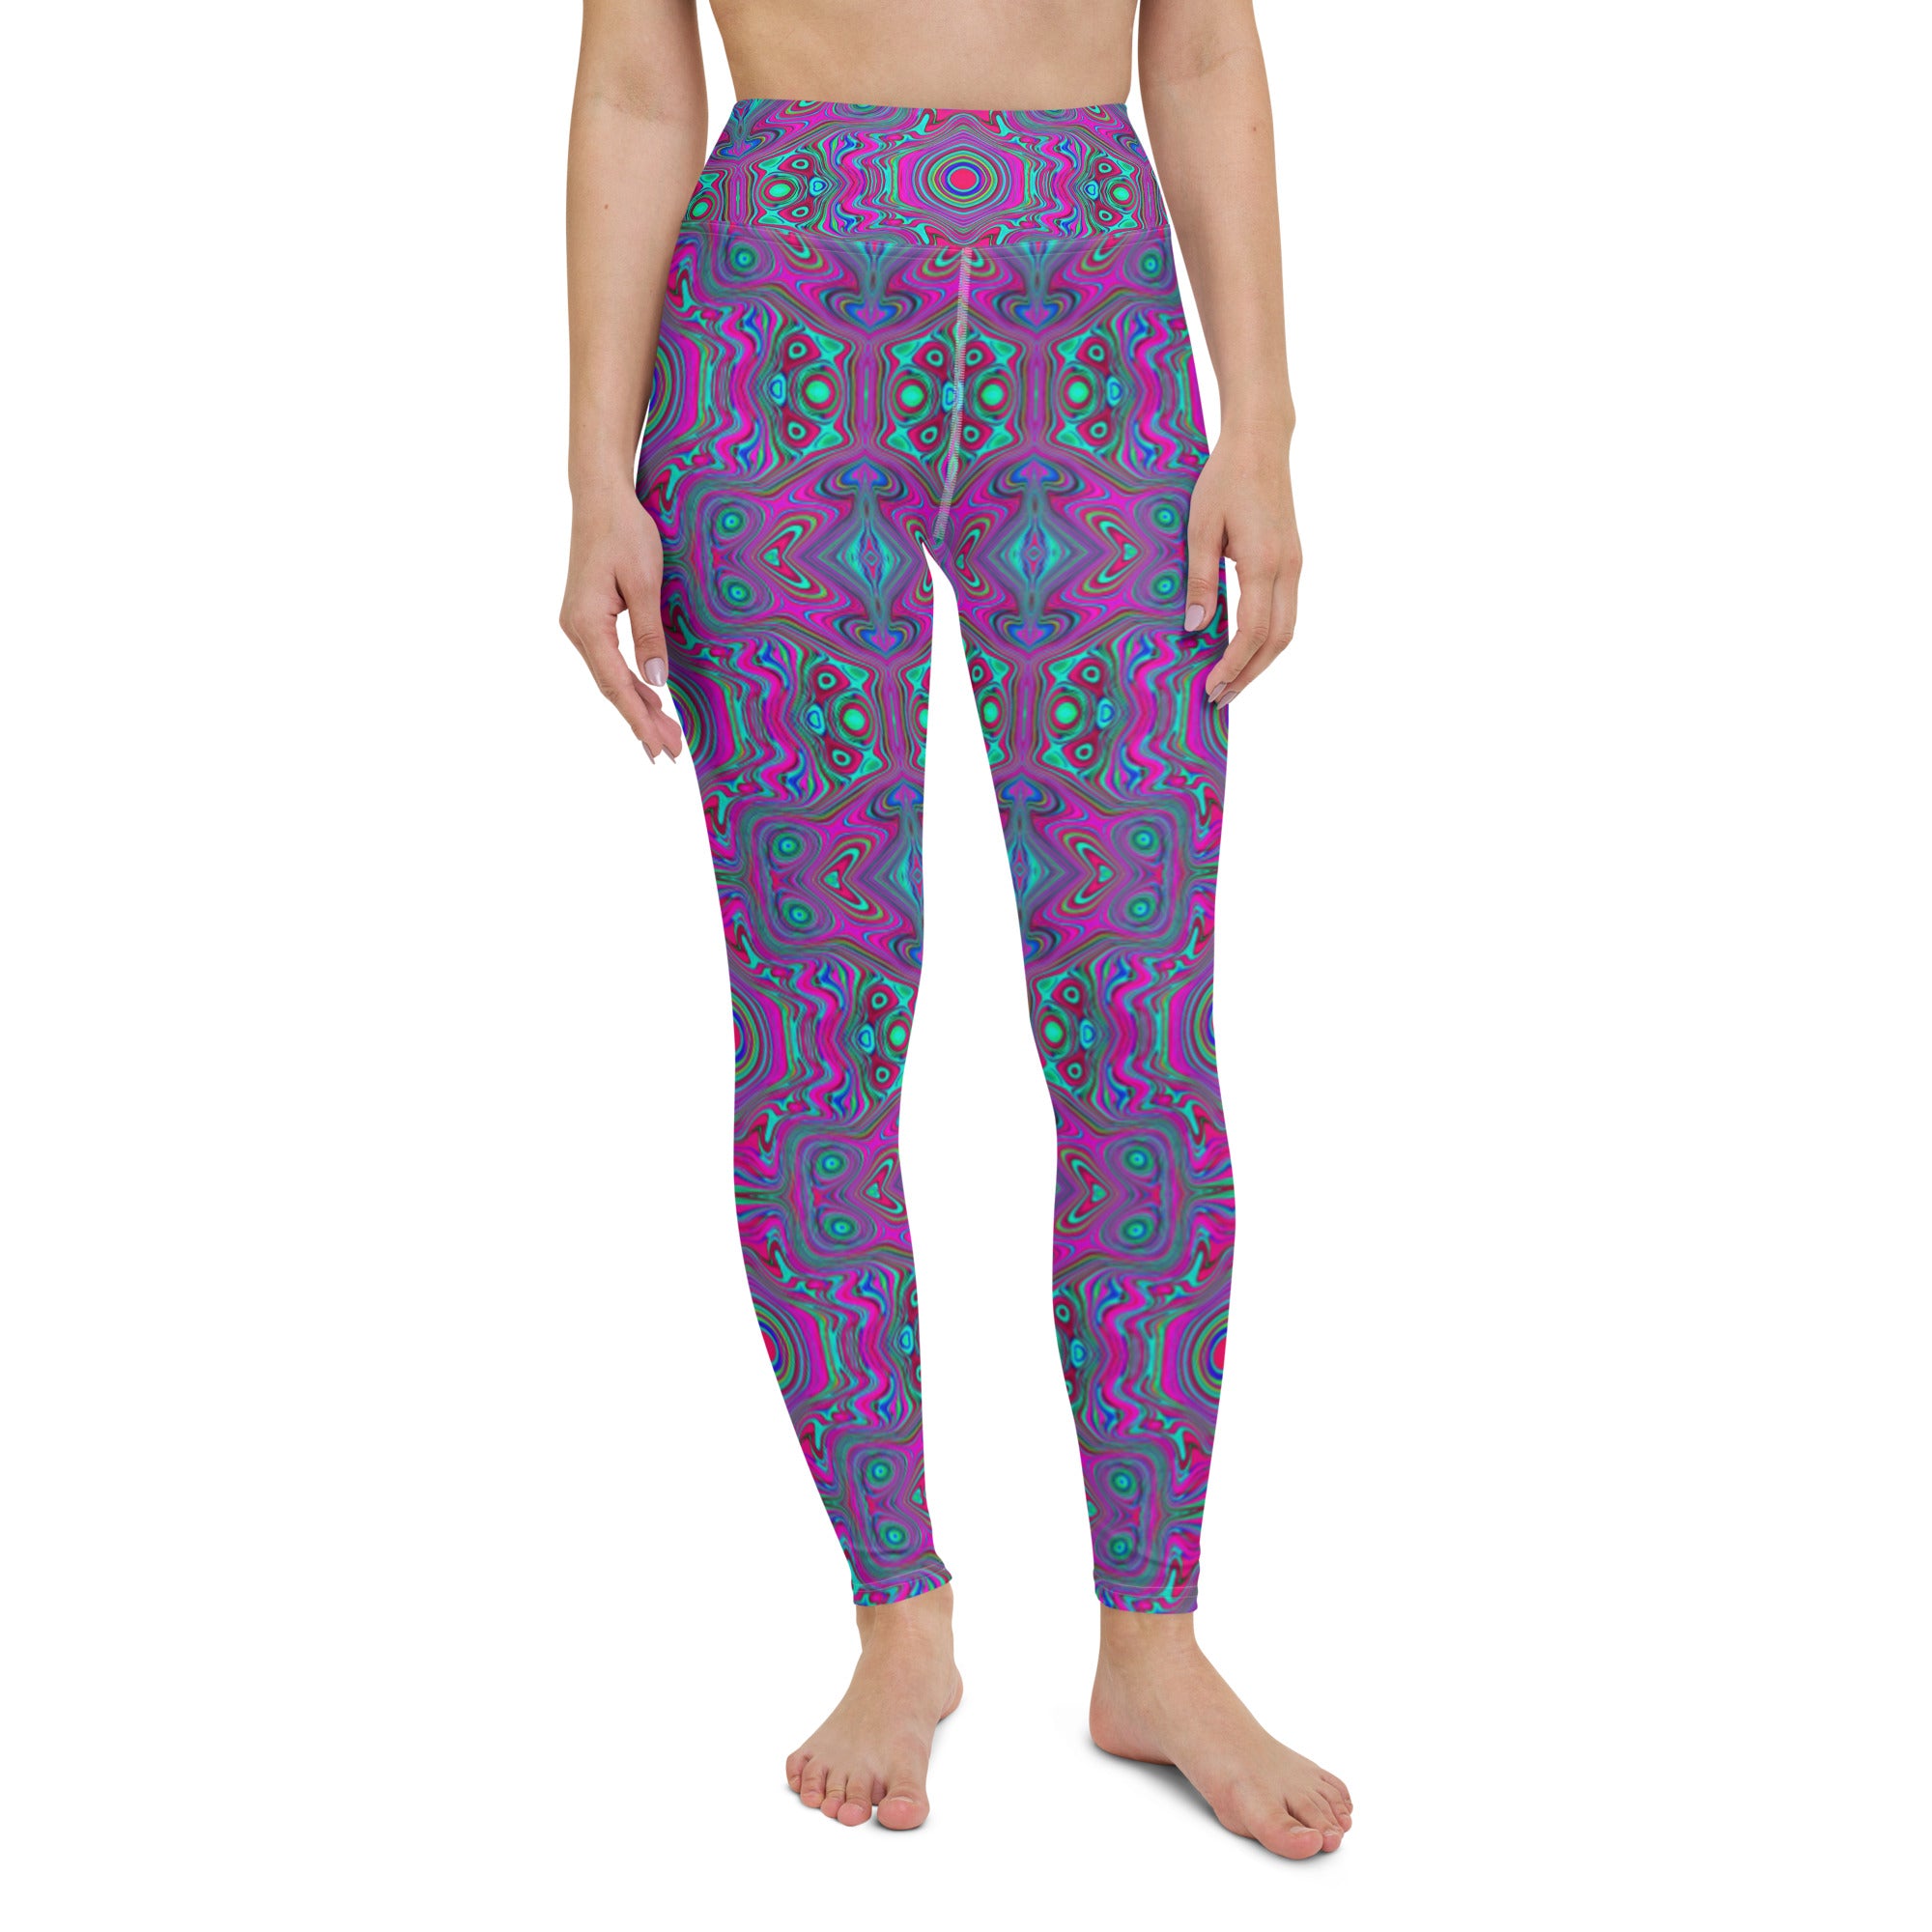 Yoga Leggings, Trippy Retro Magenta, Blue and Green Abstract